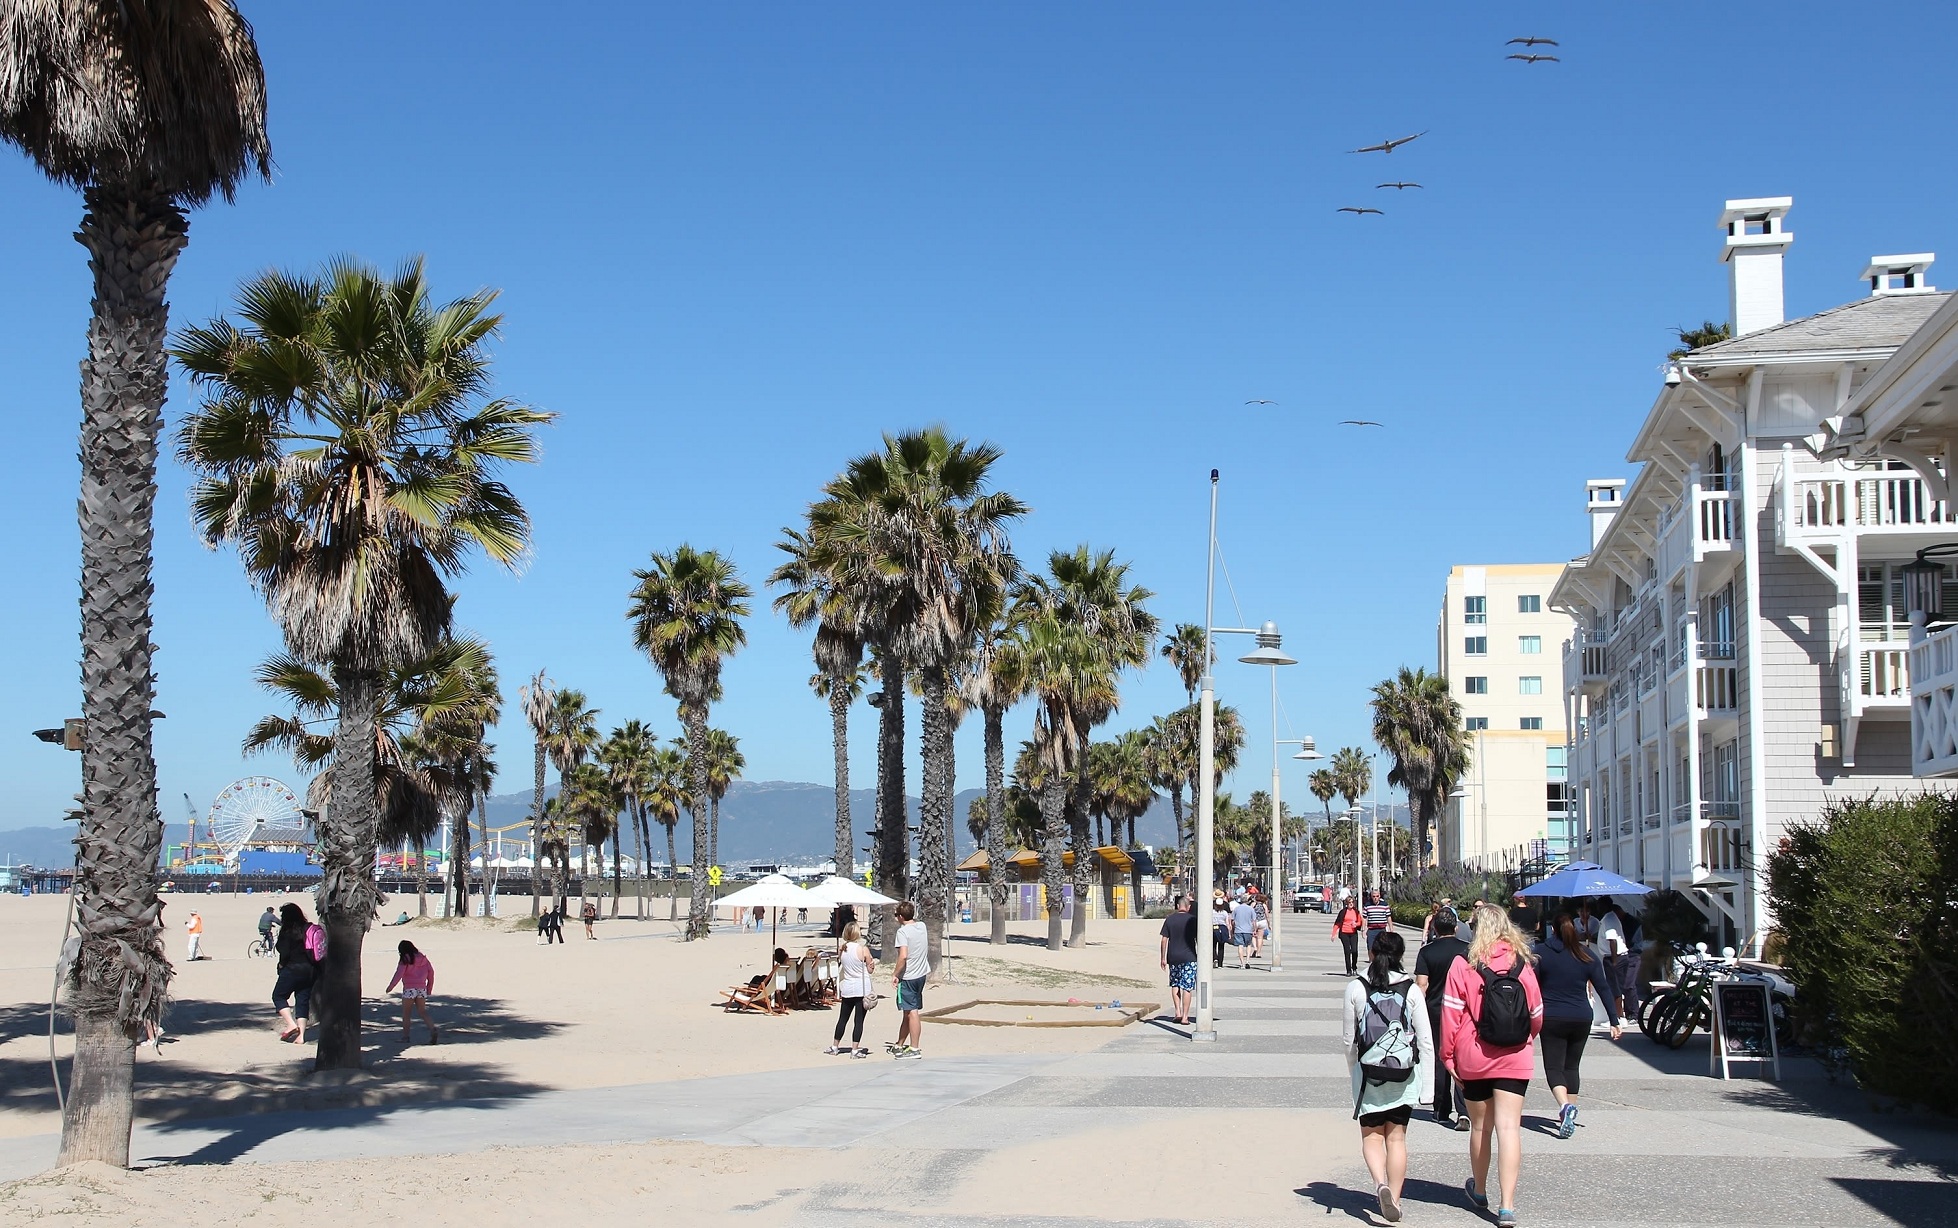 Santa Monica Captions and Quotes for Instagram